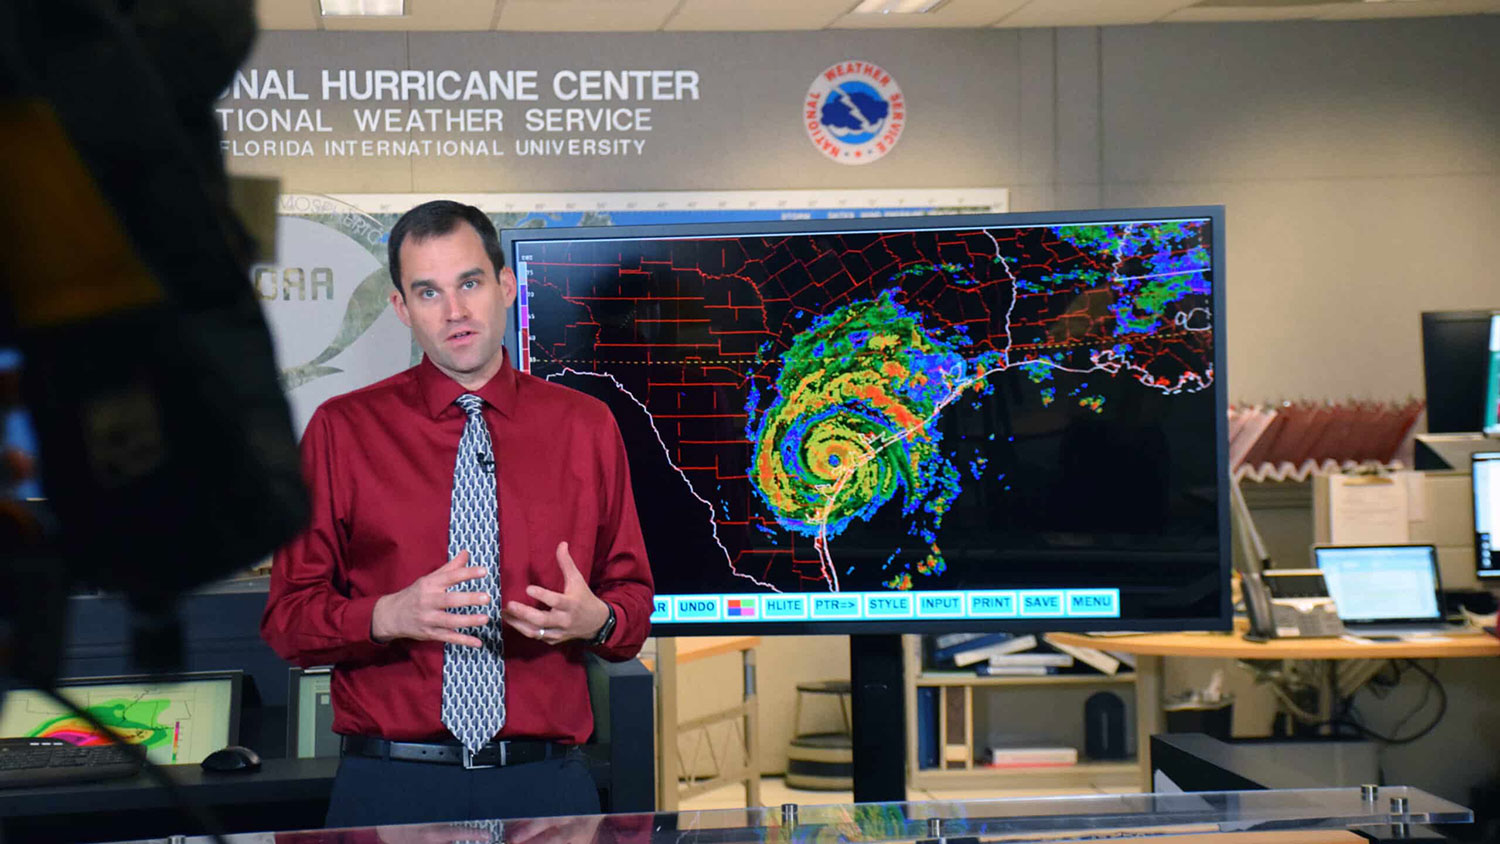 Michael Brennan speaks to a camera about a forecasted hurricane at the National Hurricane Center in Miami, Florida.